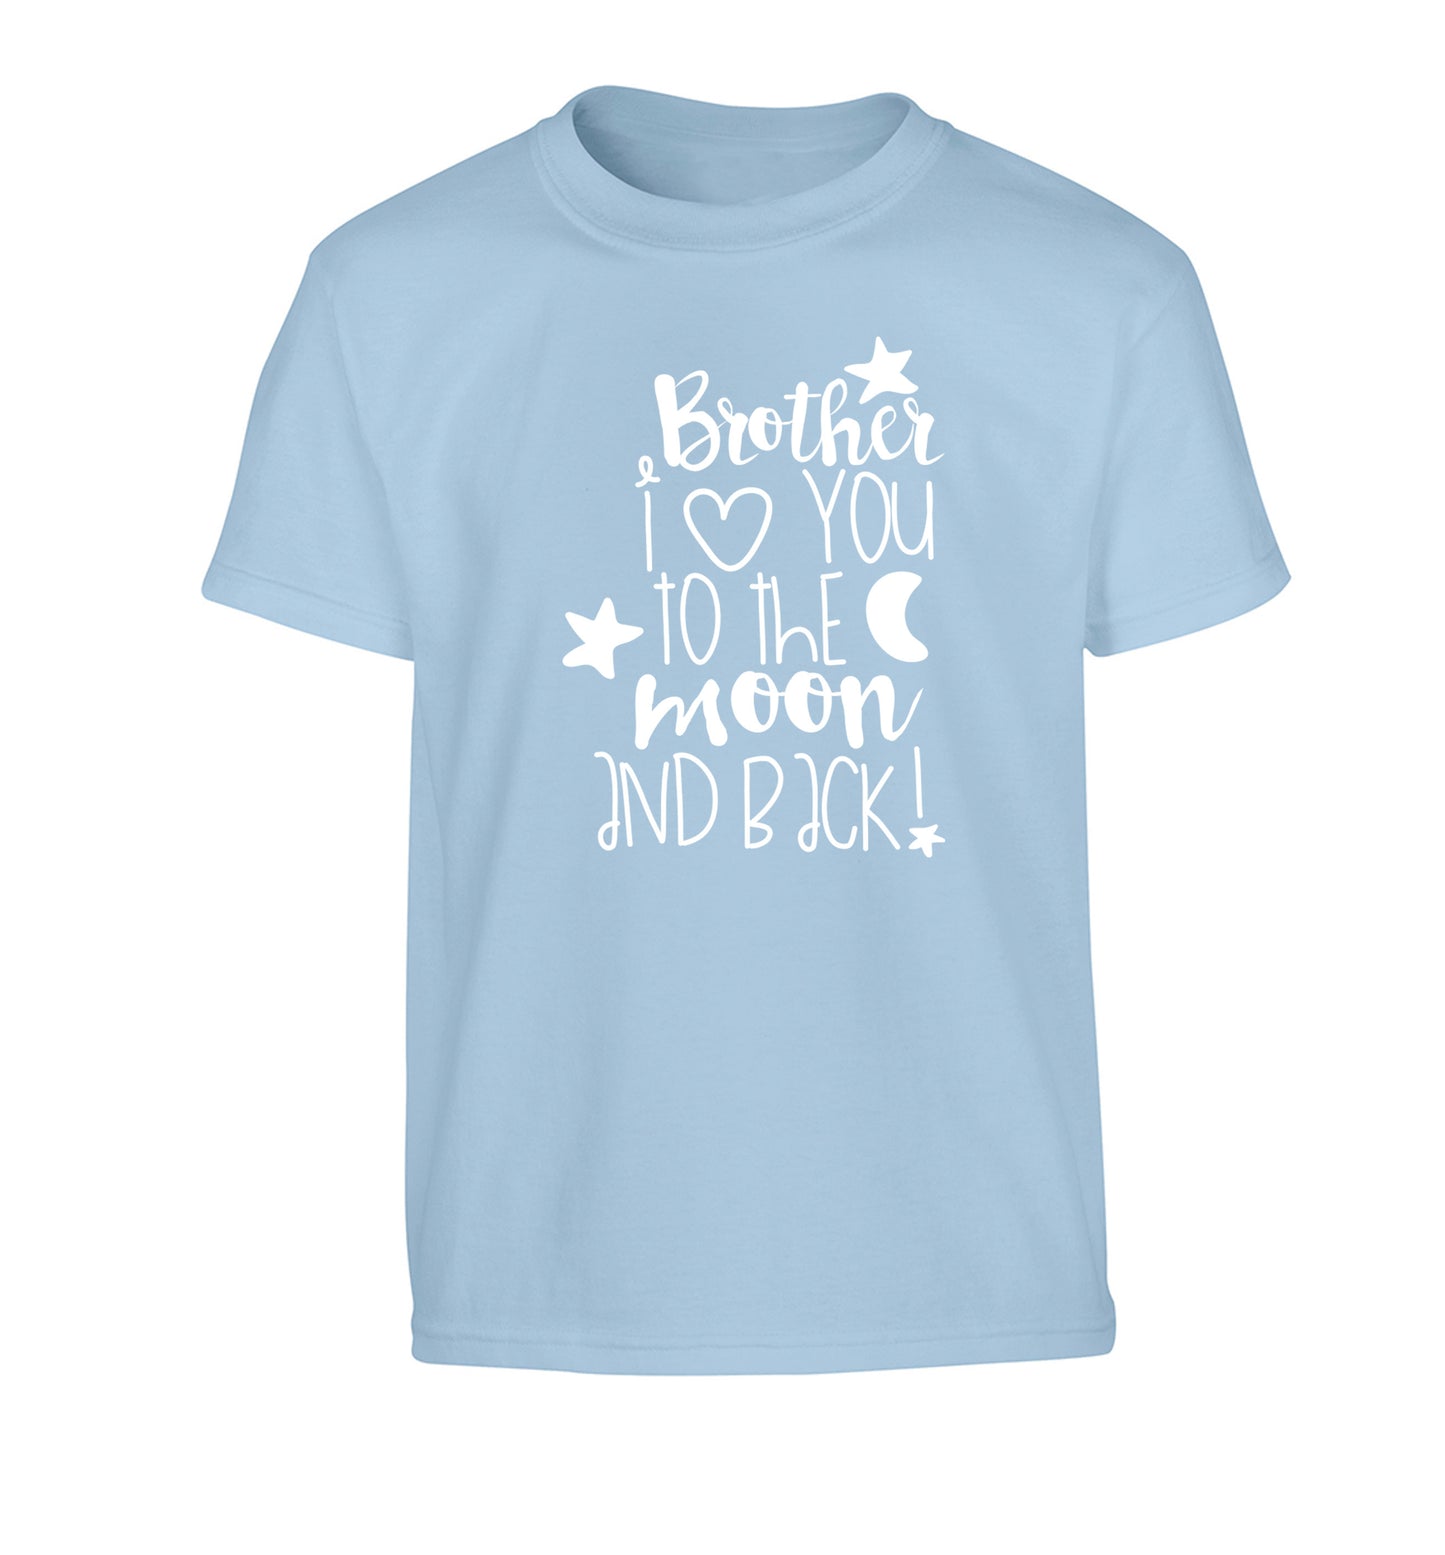 Brother I love you to the moon and back Children's light blue Tshirt 12-14 Years